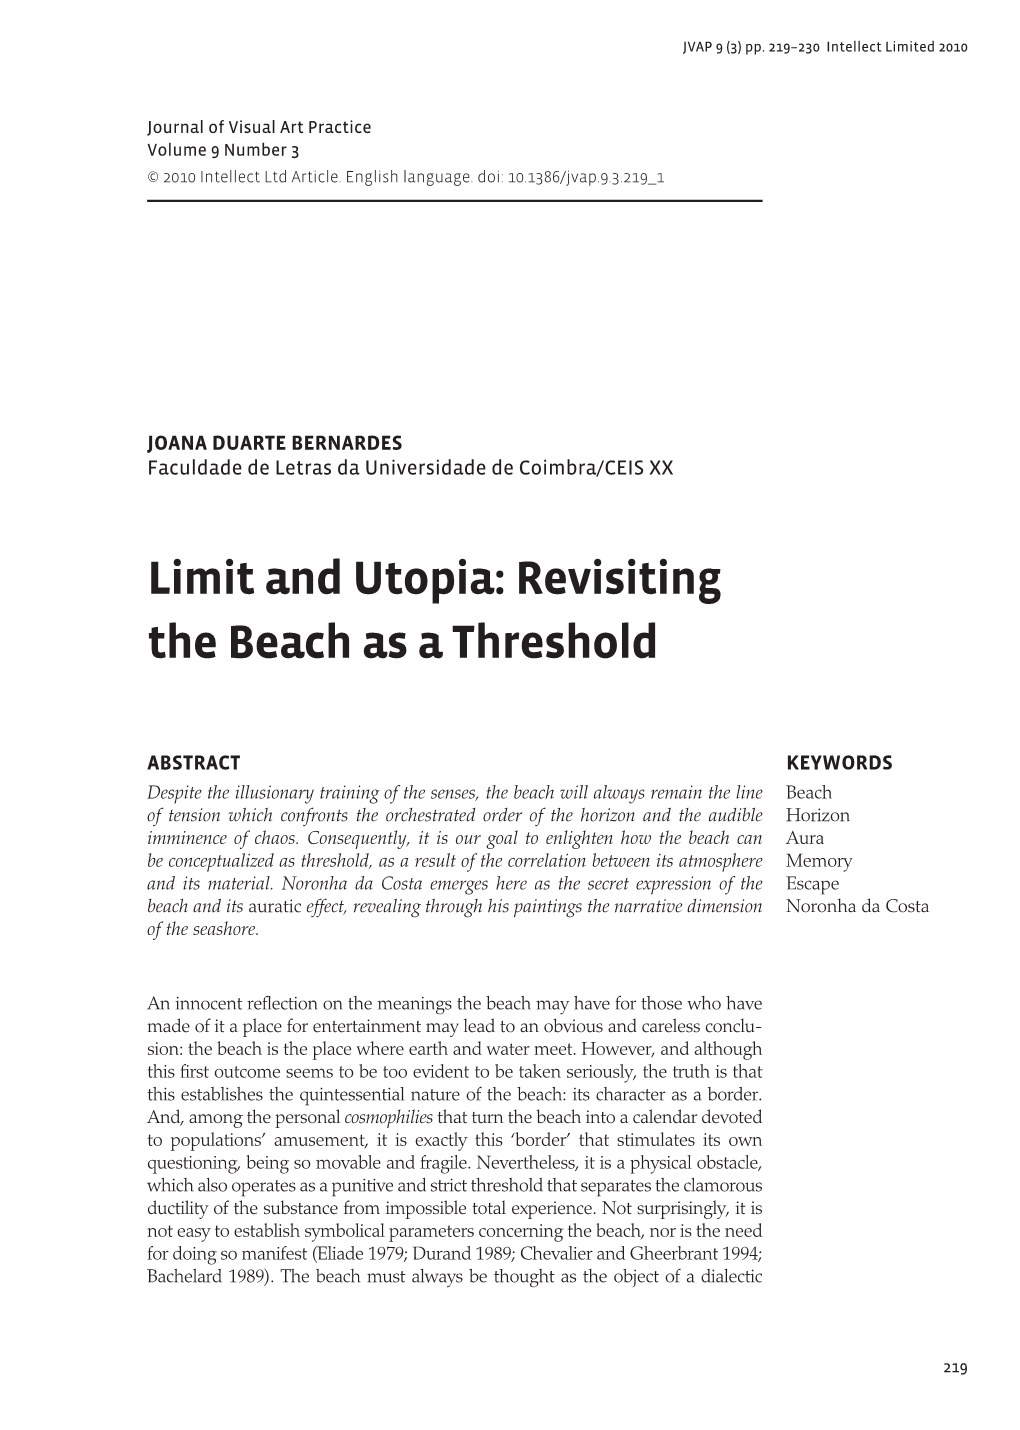 Limit and Utopia: Revisiting the Beach As a Threshold